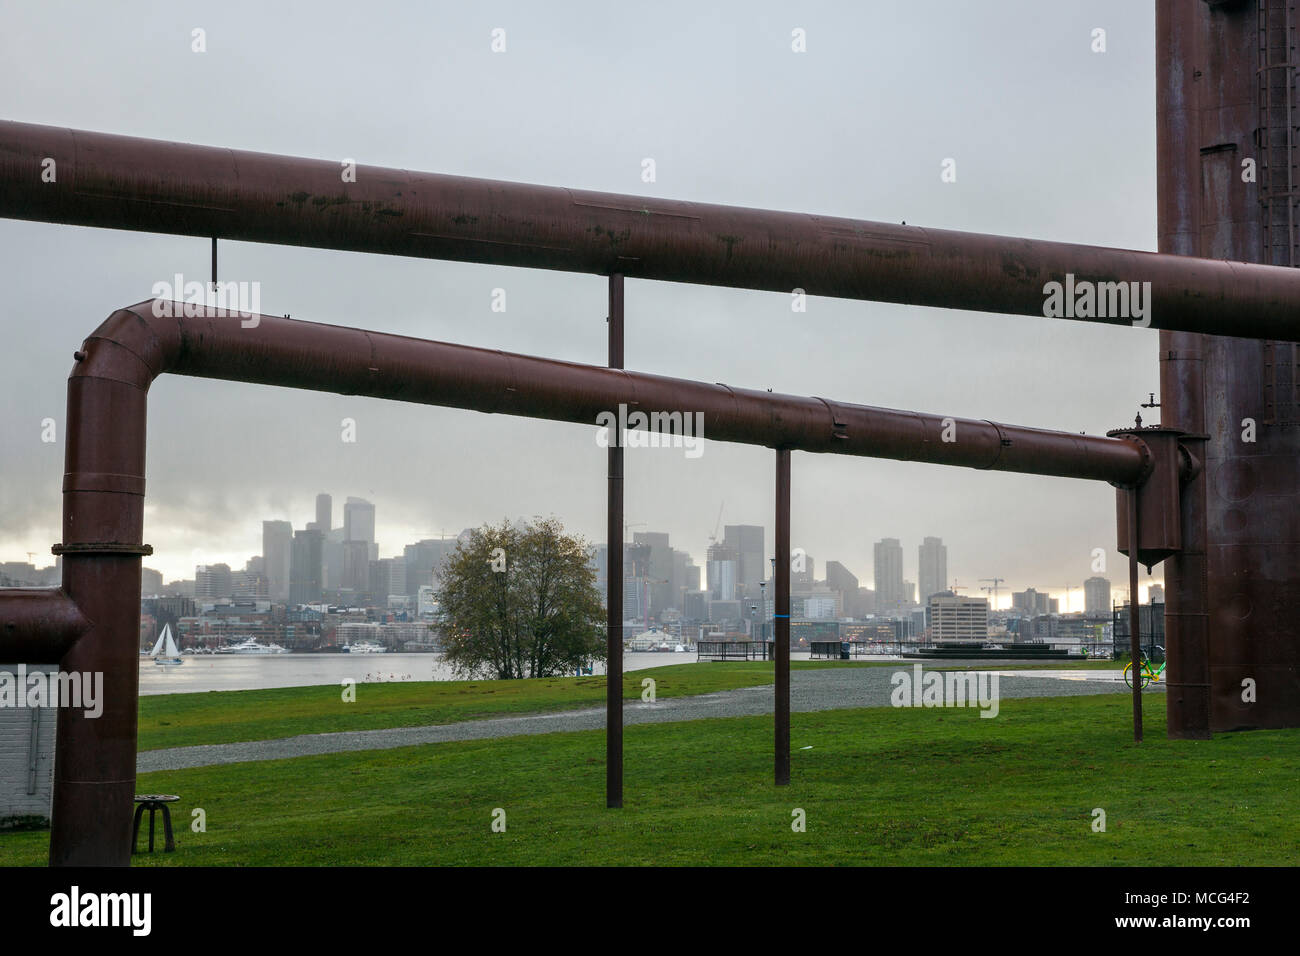 WA14367-00...WASHINGTON - Seattle city skyline framed by the industrial pipes at Gas Works Park on a rainy day. Stock Photo